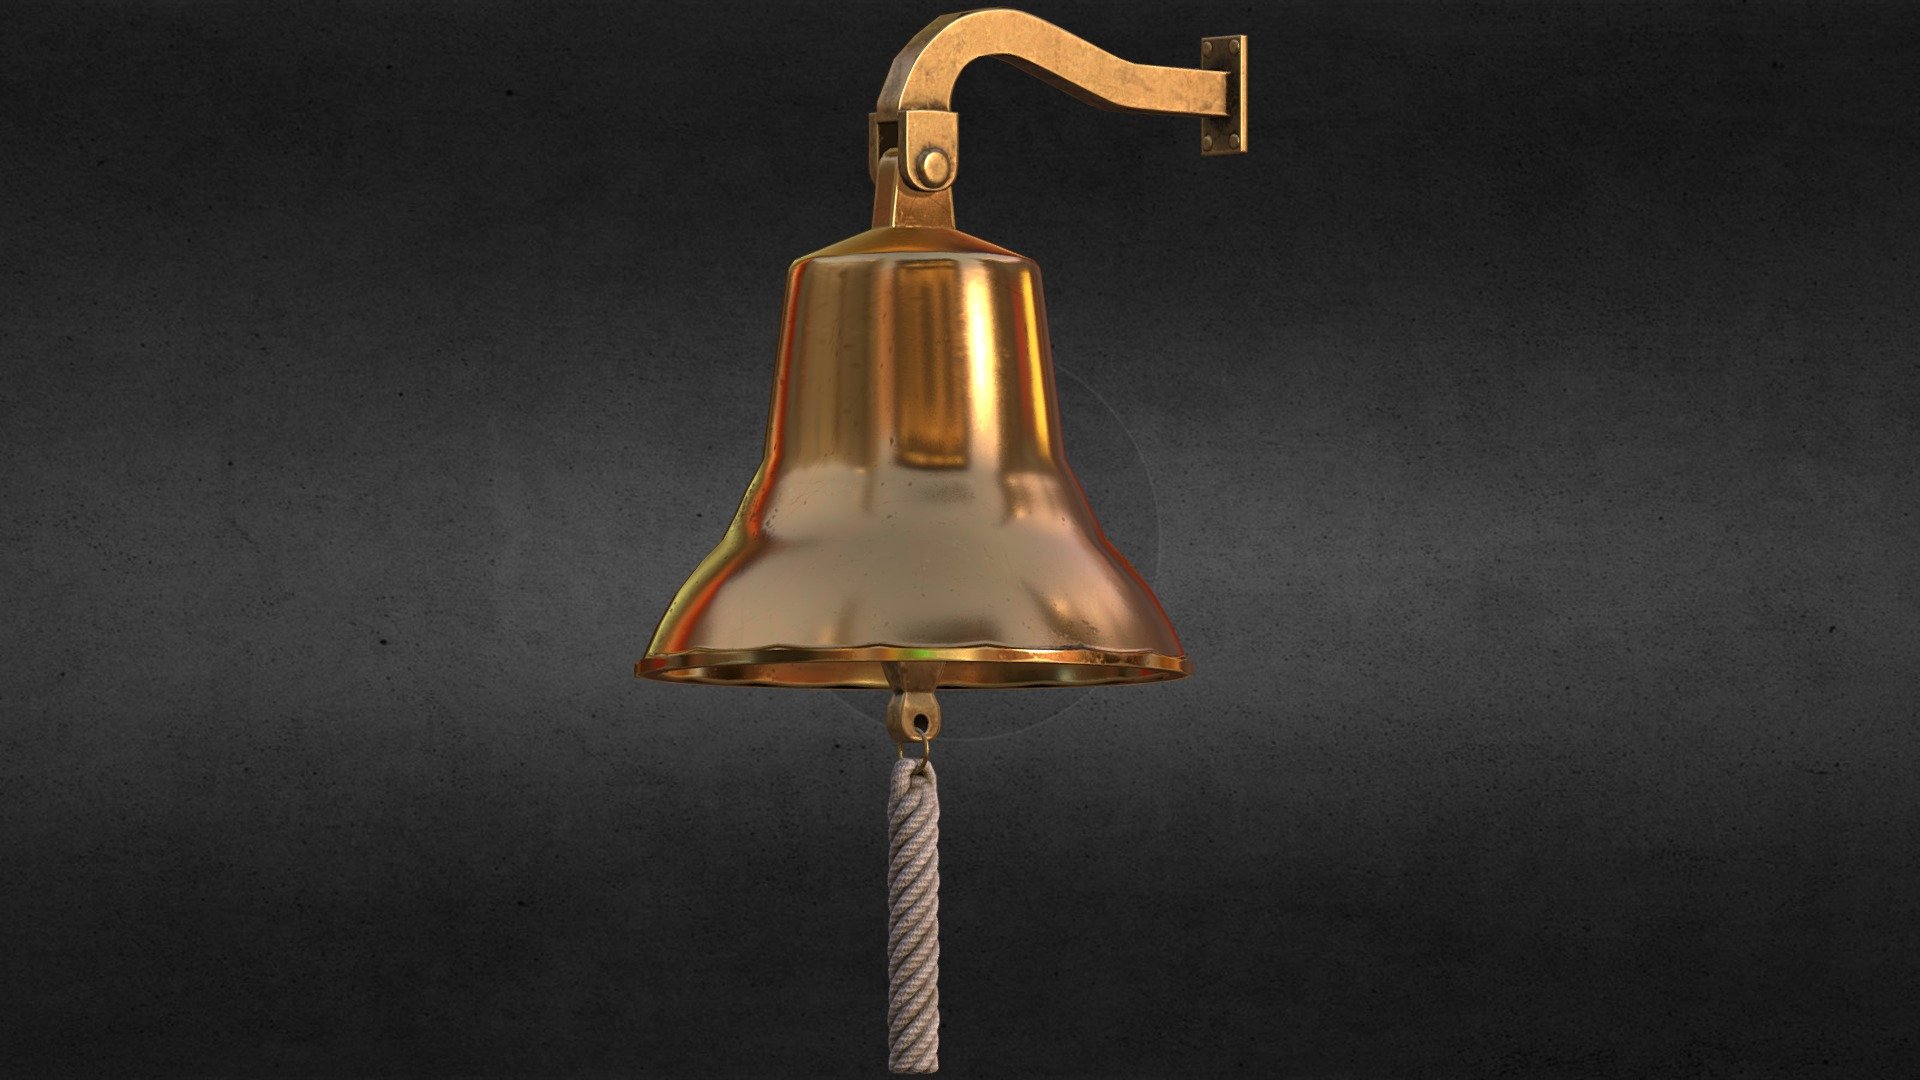 Nautical Ship's Bell. Brass Material. Light used metal. 

The set contains low-polygon and high-polygon objects.
Tip: If desired, the number of polygons can be reduced

Zip contains:

1 .max (3dsMax 2016)

1 .mat  (Vray Materials)

1 .blend (low poly with Subsurf.mod, with UV and Materials)

1 .fbx (high poly, smoothed)

1 .fbx (low poly, not smoothed)

1 .obj (high poly, smoothed)

1 .obj (low poly, not smoothed)

High resolution textures(4096x4096 (.PNG)): Base Color, Ambient Occlusion, Height map, Normal map, Metallic, Roughness

Vray Textures Pack(.PNG)

PBR Textures Pack(.PNG)

The author hopes to your creativity.

If you have questions or suggestions, please contact me

P.S. This model was created in software &lsquo;Blender 3D' with GNU General Public License (GPL, or free software) - Nautical Bell - 3D model by Vitamin (@btrseller) 3d model